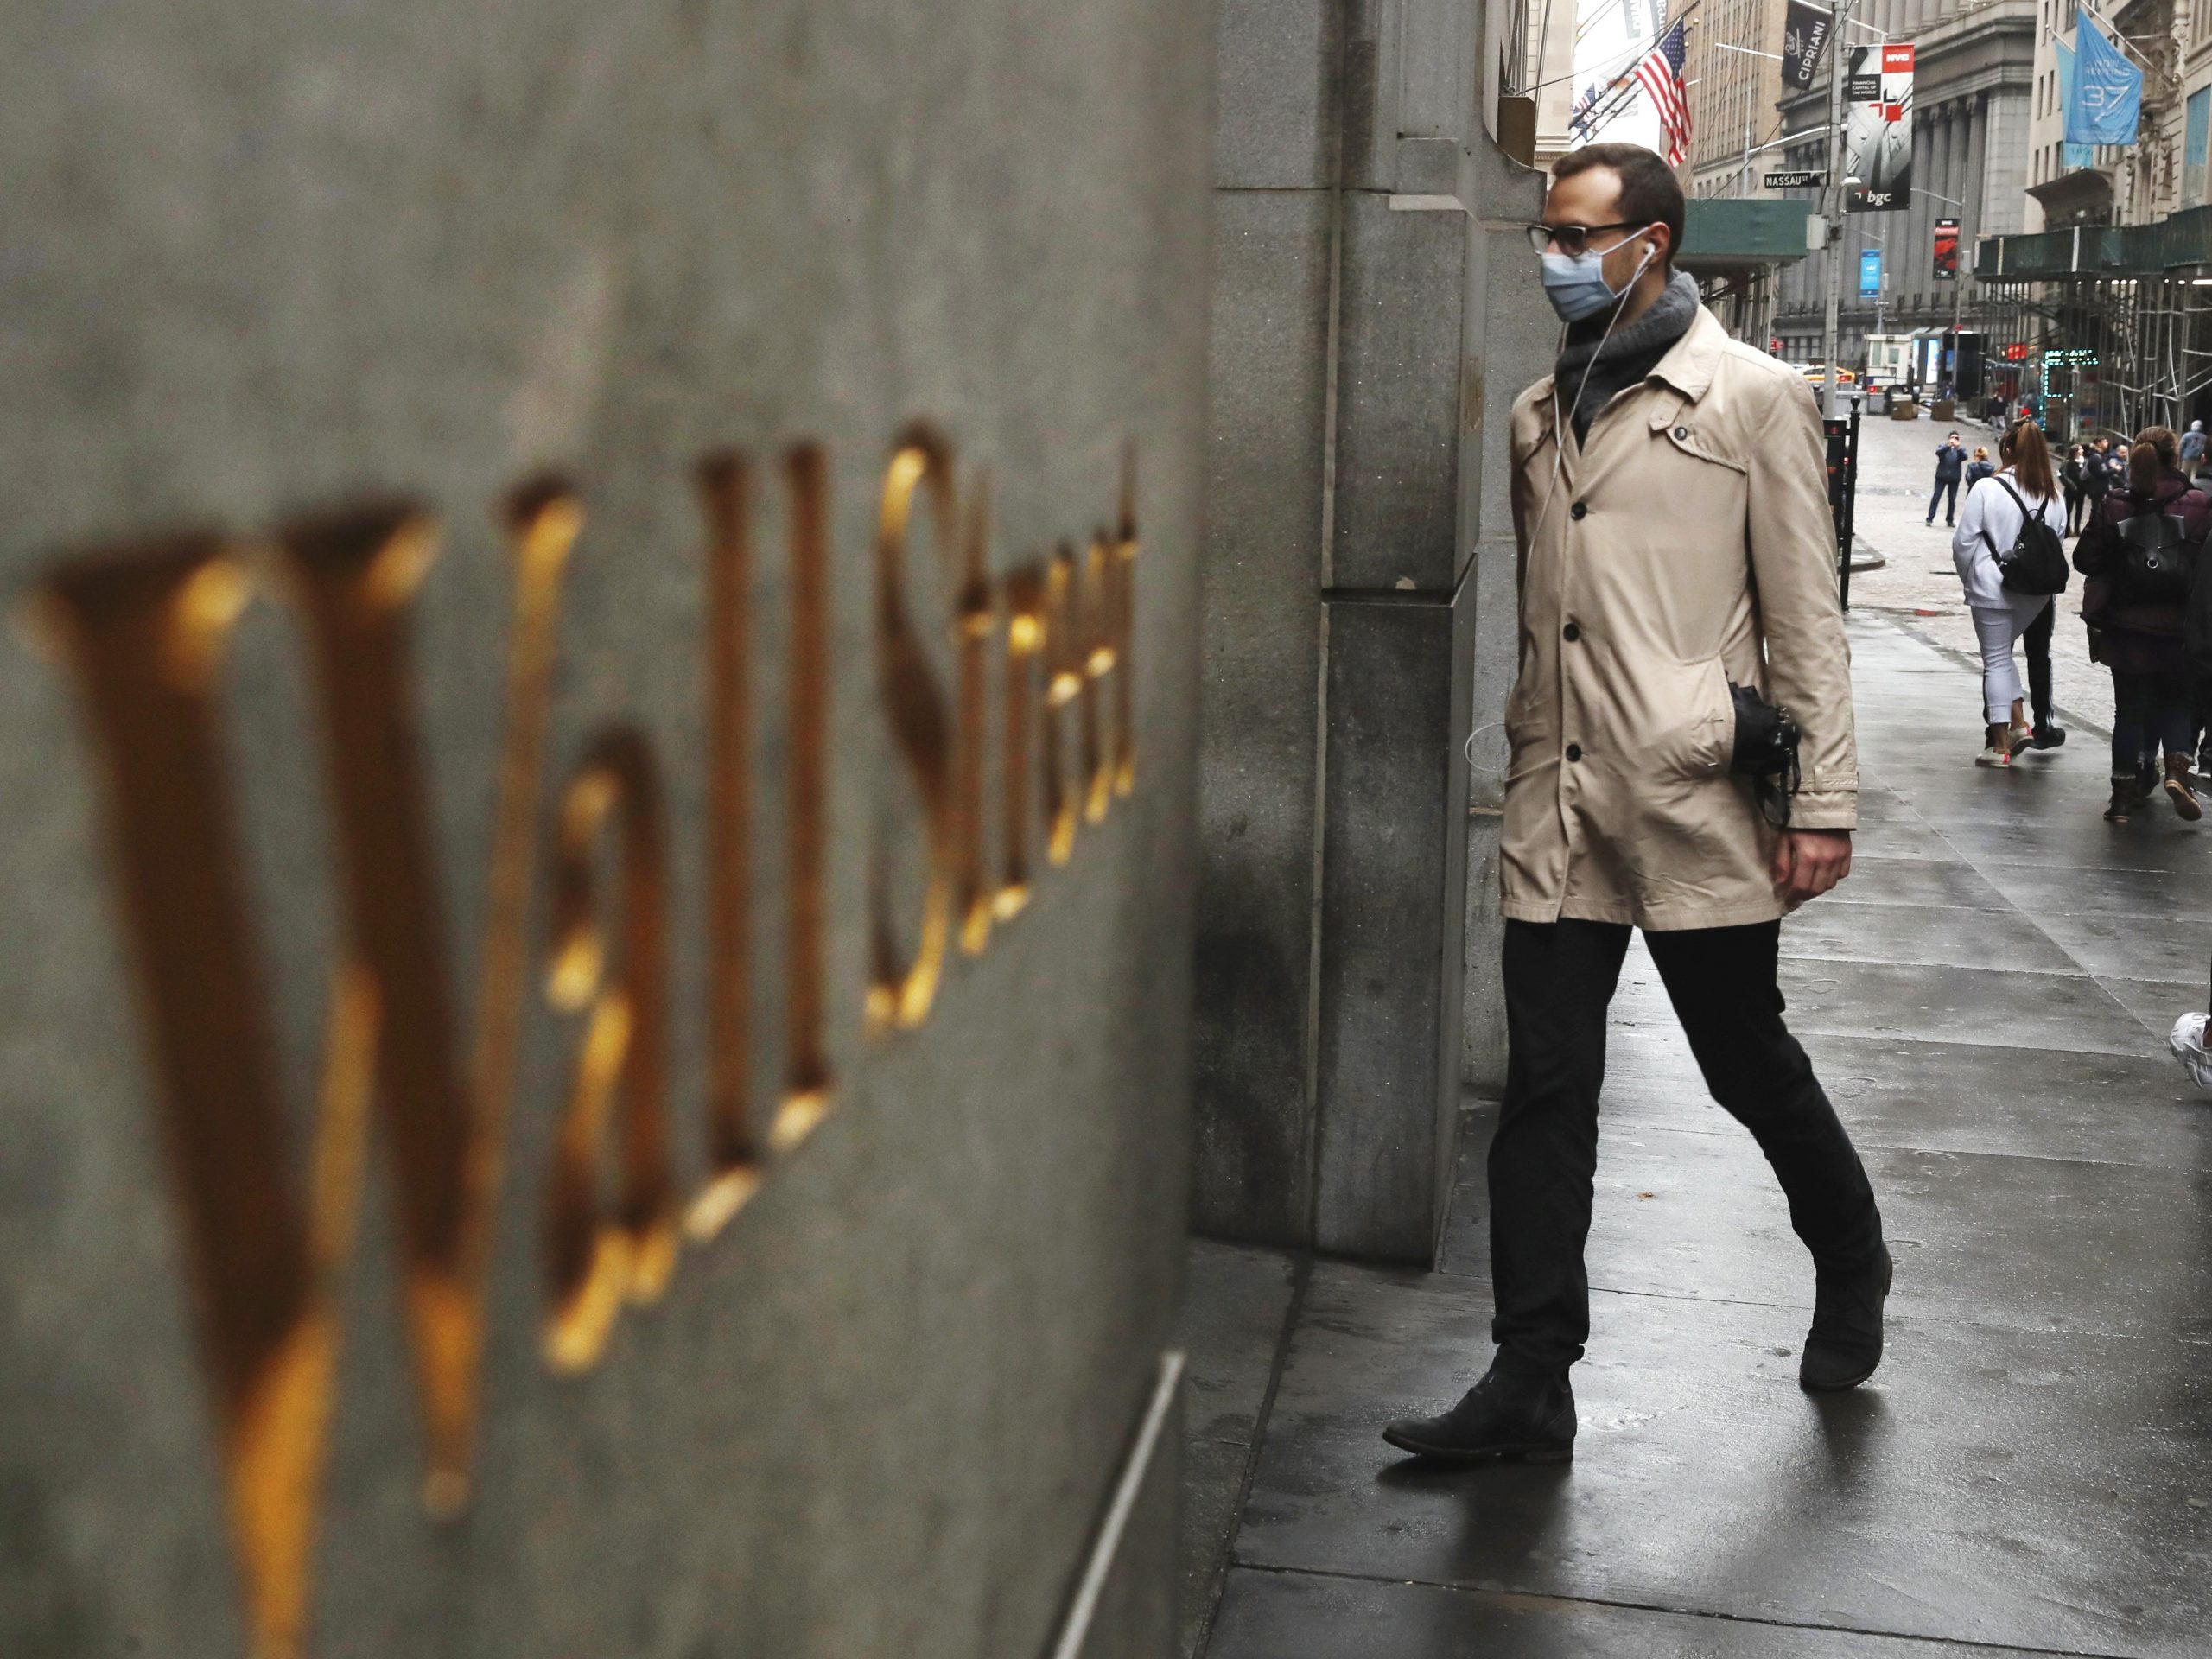 A man wears a protective mask as he walks on Wall Street during the coronavirus outbreak in New York